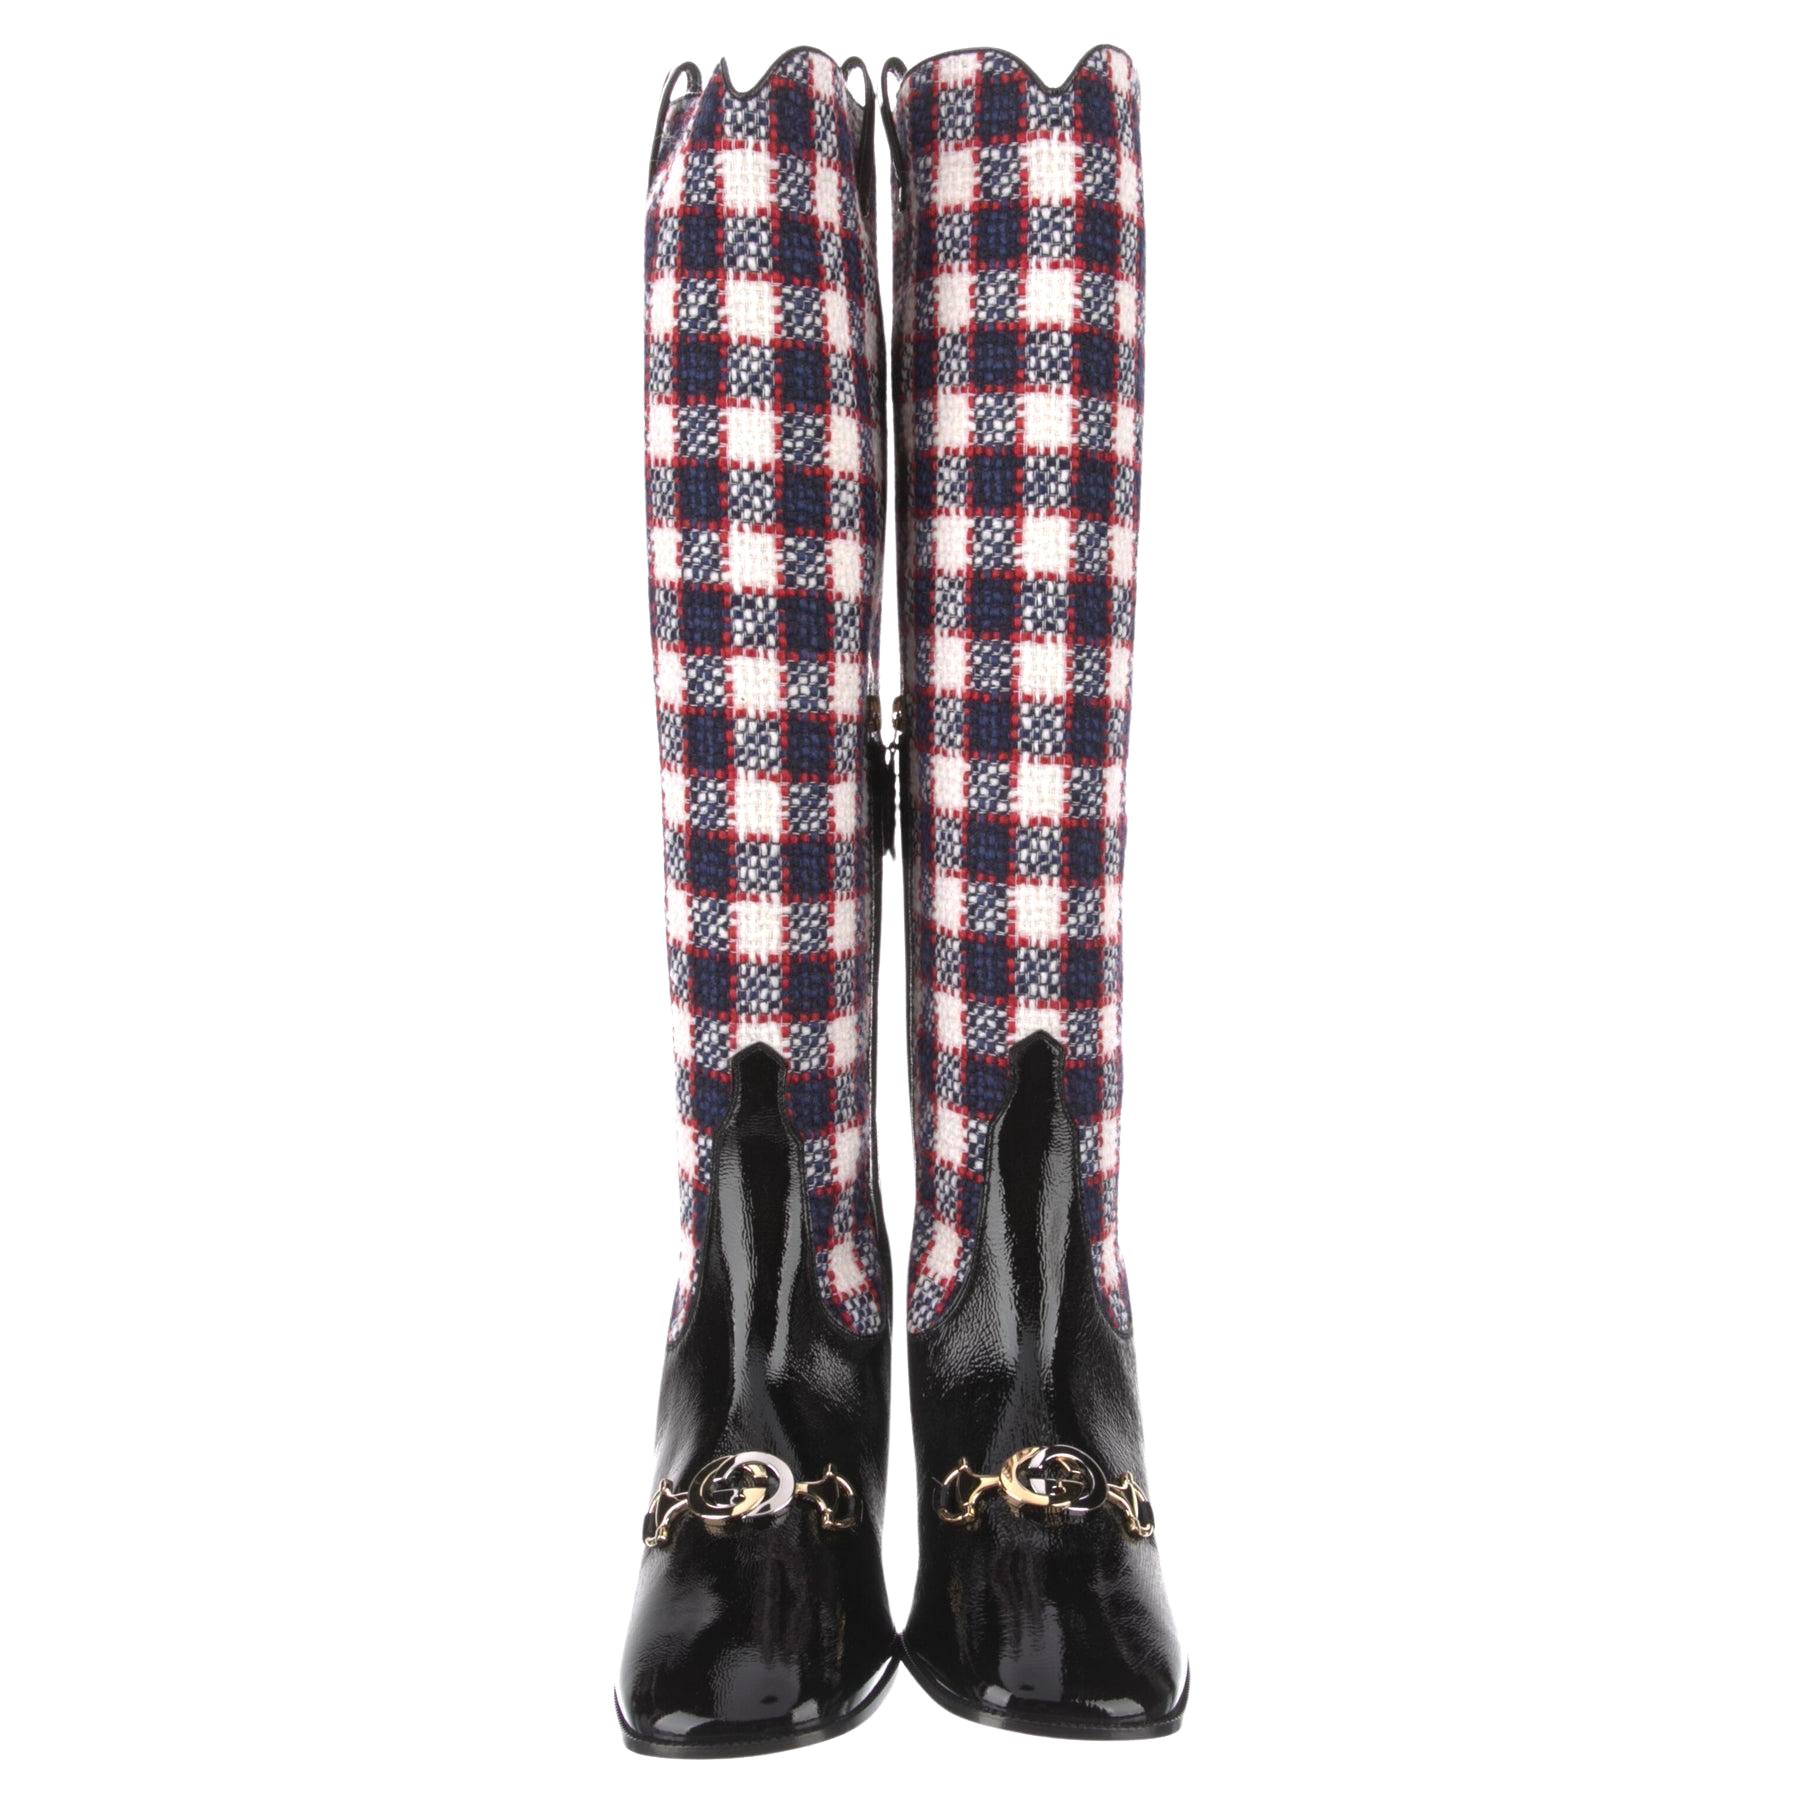 New With Box Gucci 2019 Zumi Plaid Patent and Wool Boots Sz 39 For Sale